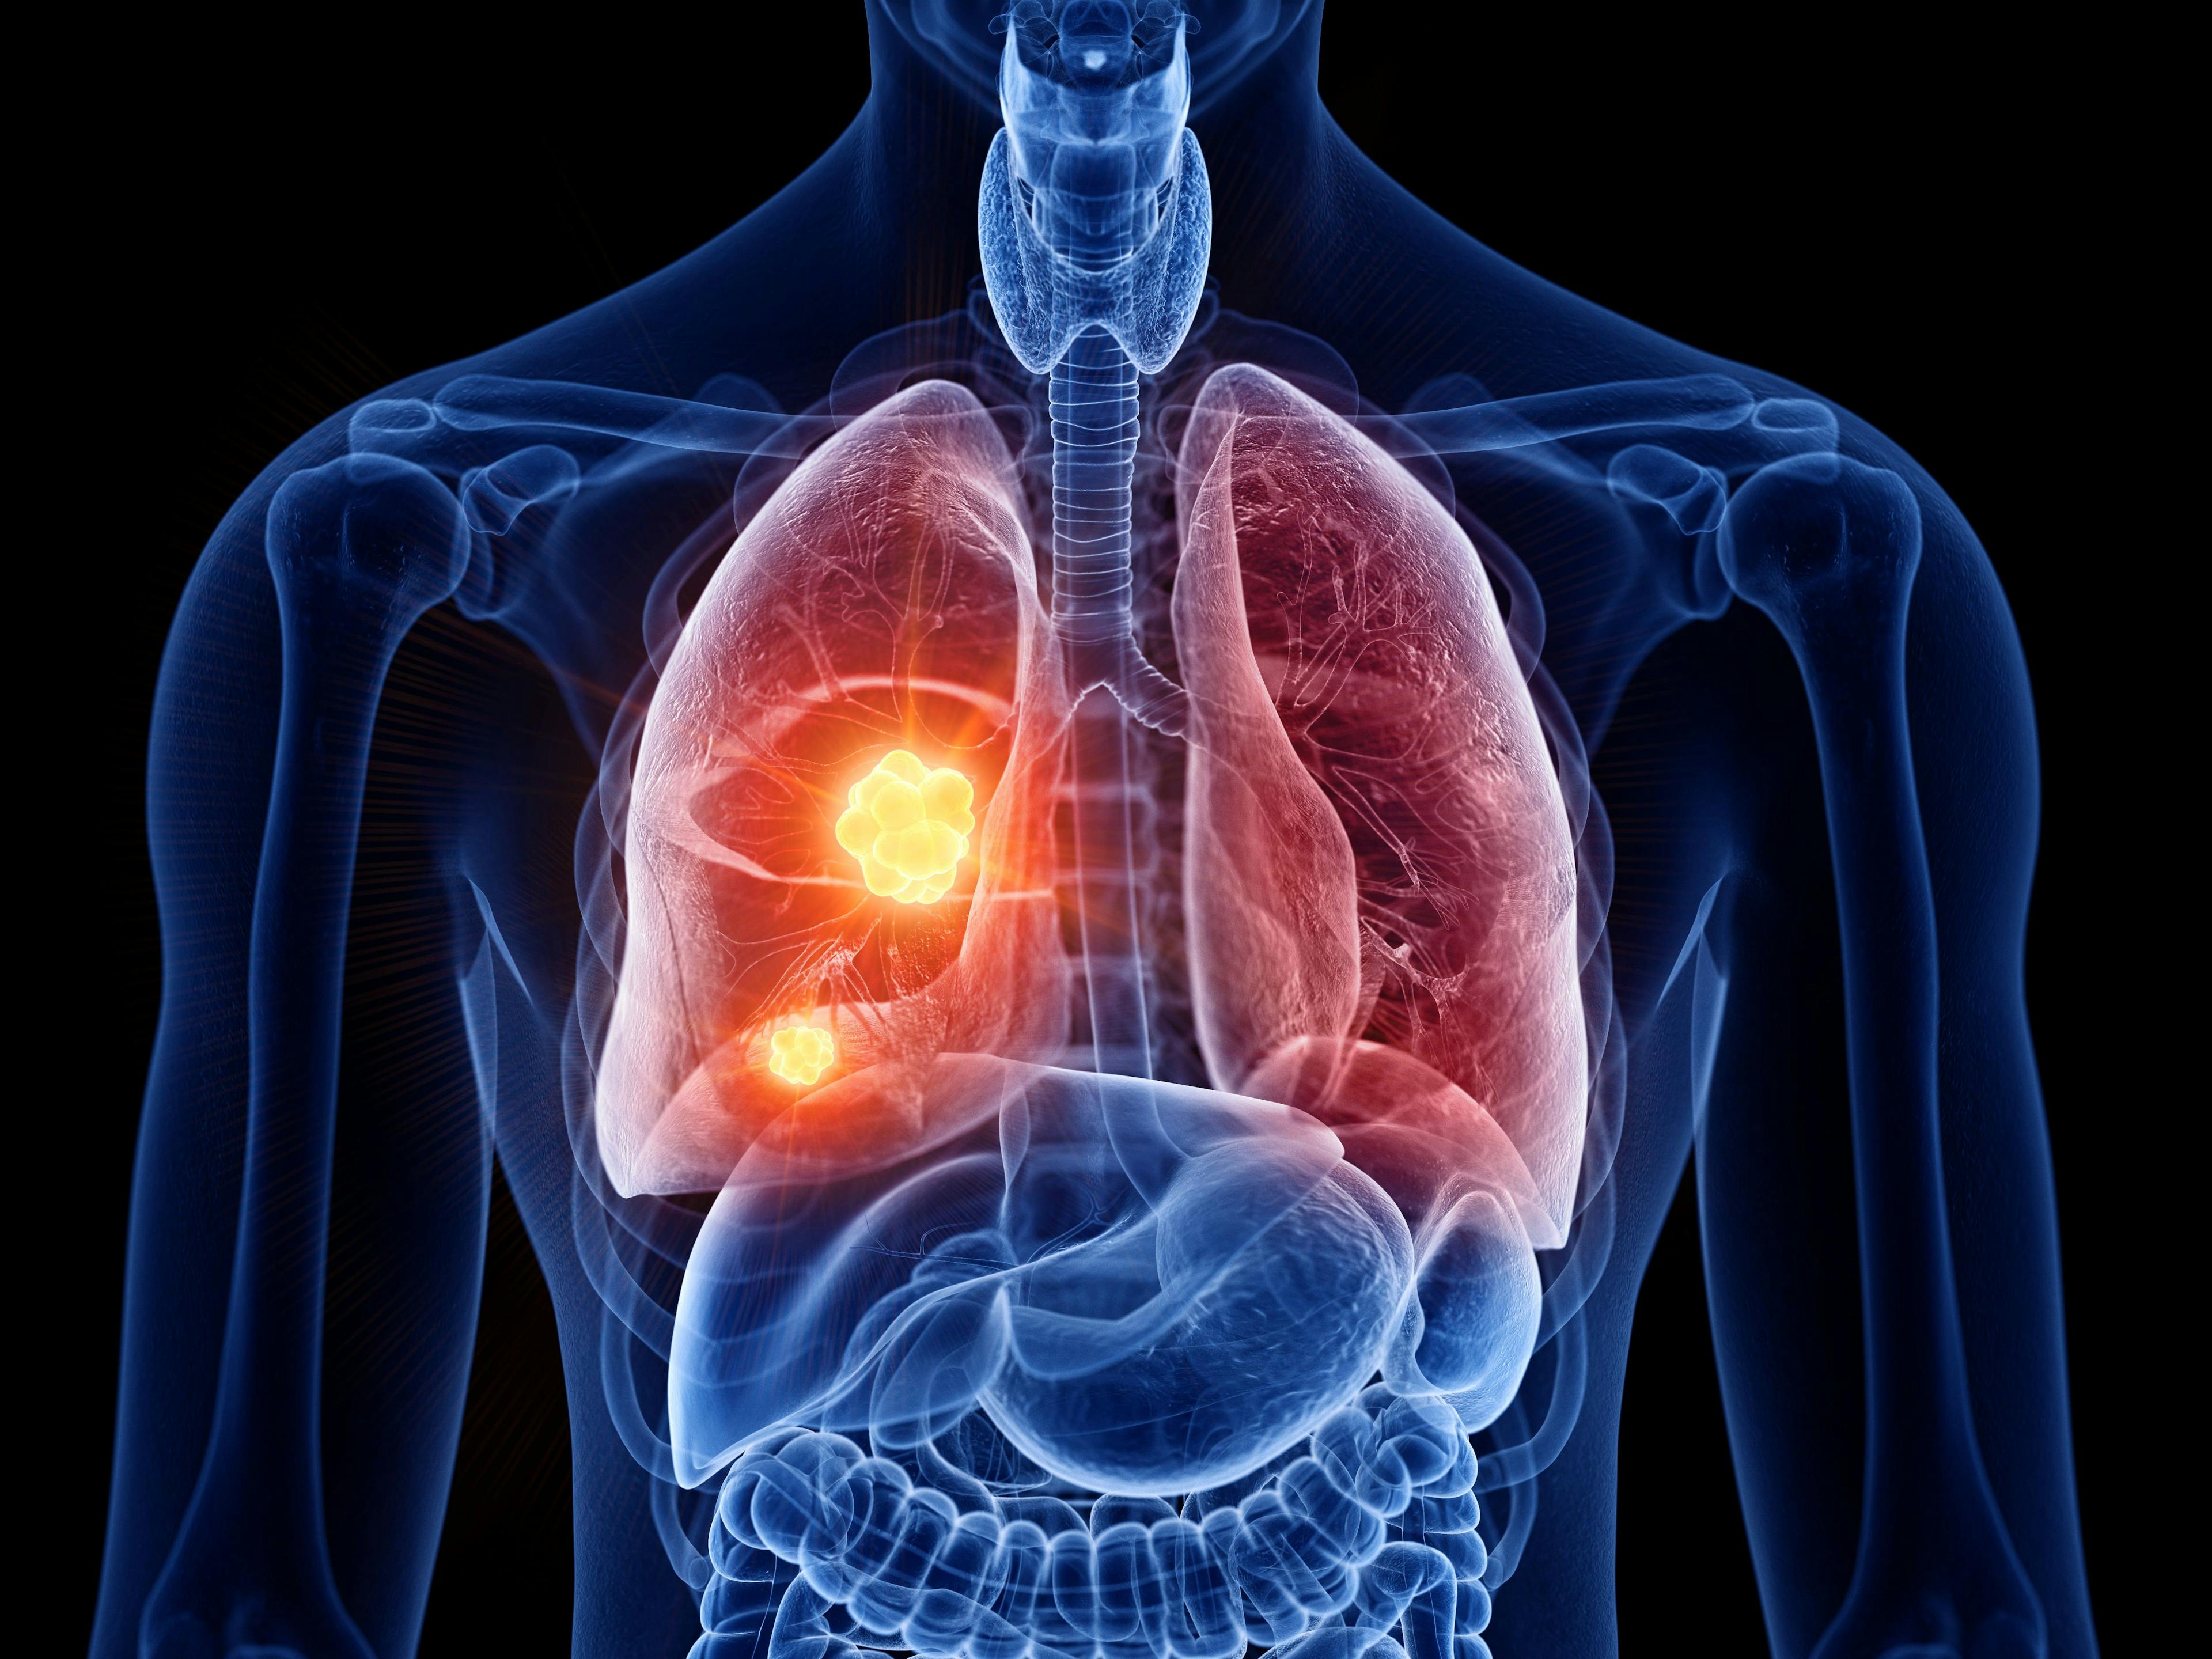 3d rendered medically accurate illustration of lung cancer | Image Credit: © SciePro - stock.adobe.com